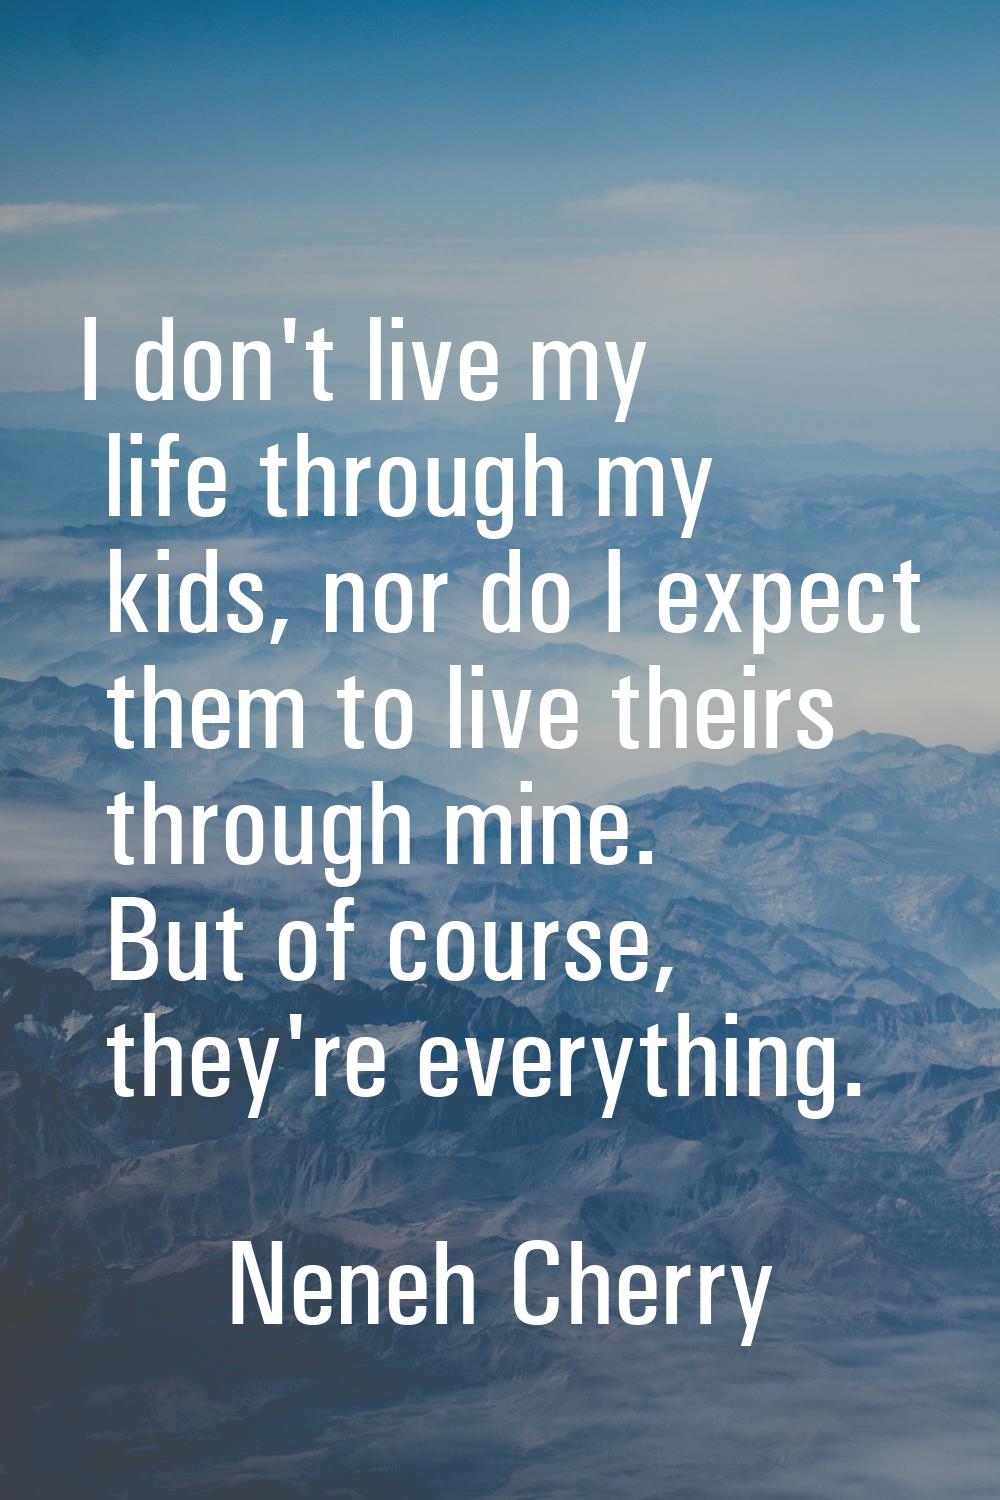 I don't live my life through my kids, nor do I expect them to live theirs through mine. But of cour